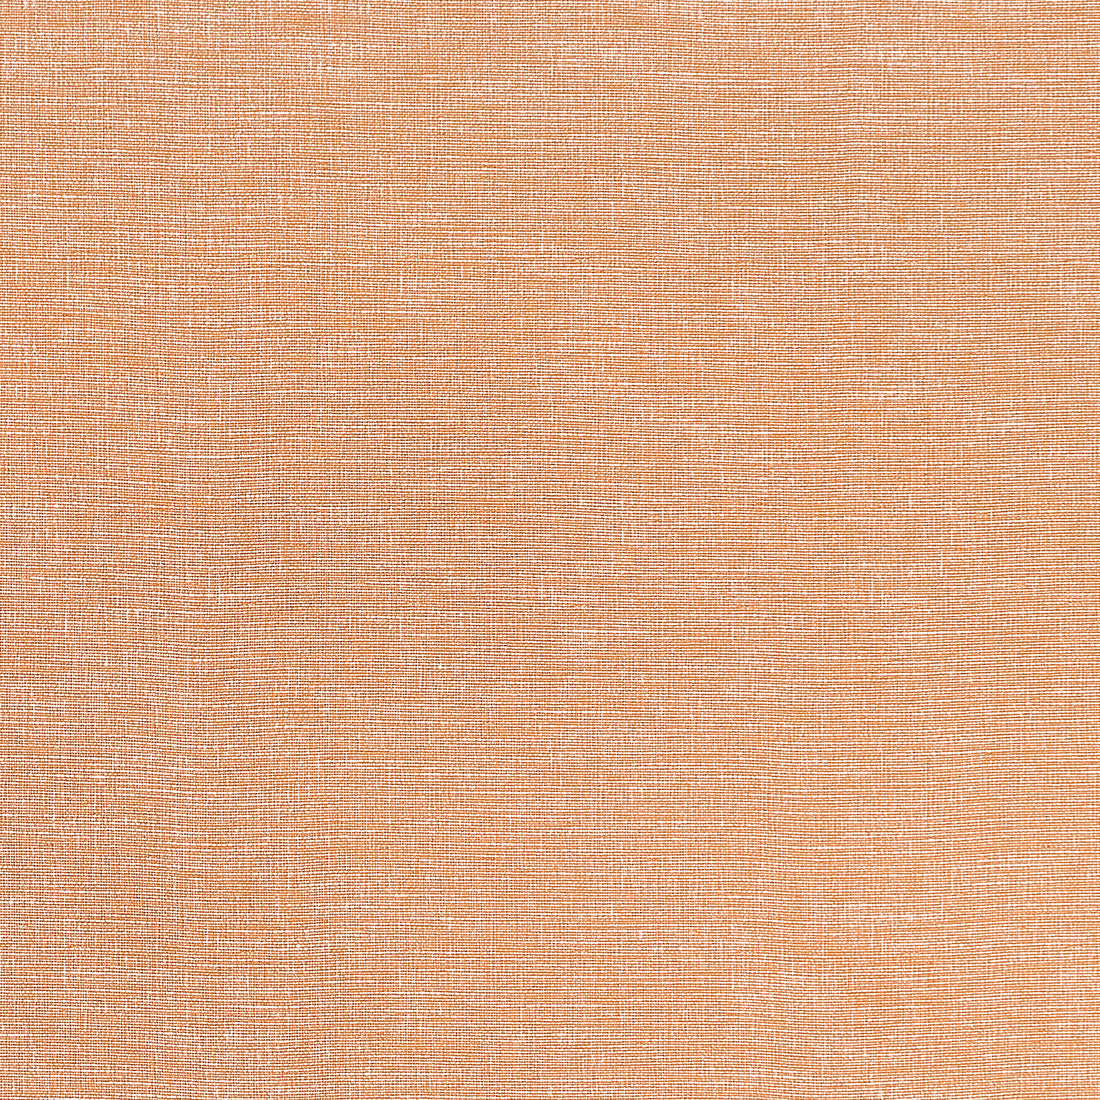 Finley fabric in marmalade color - pattern number W81612 - by Thibaut in the Locale collection